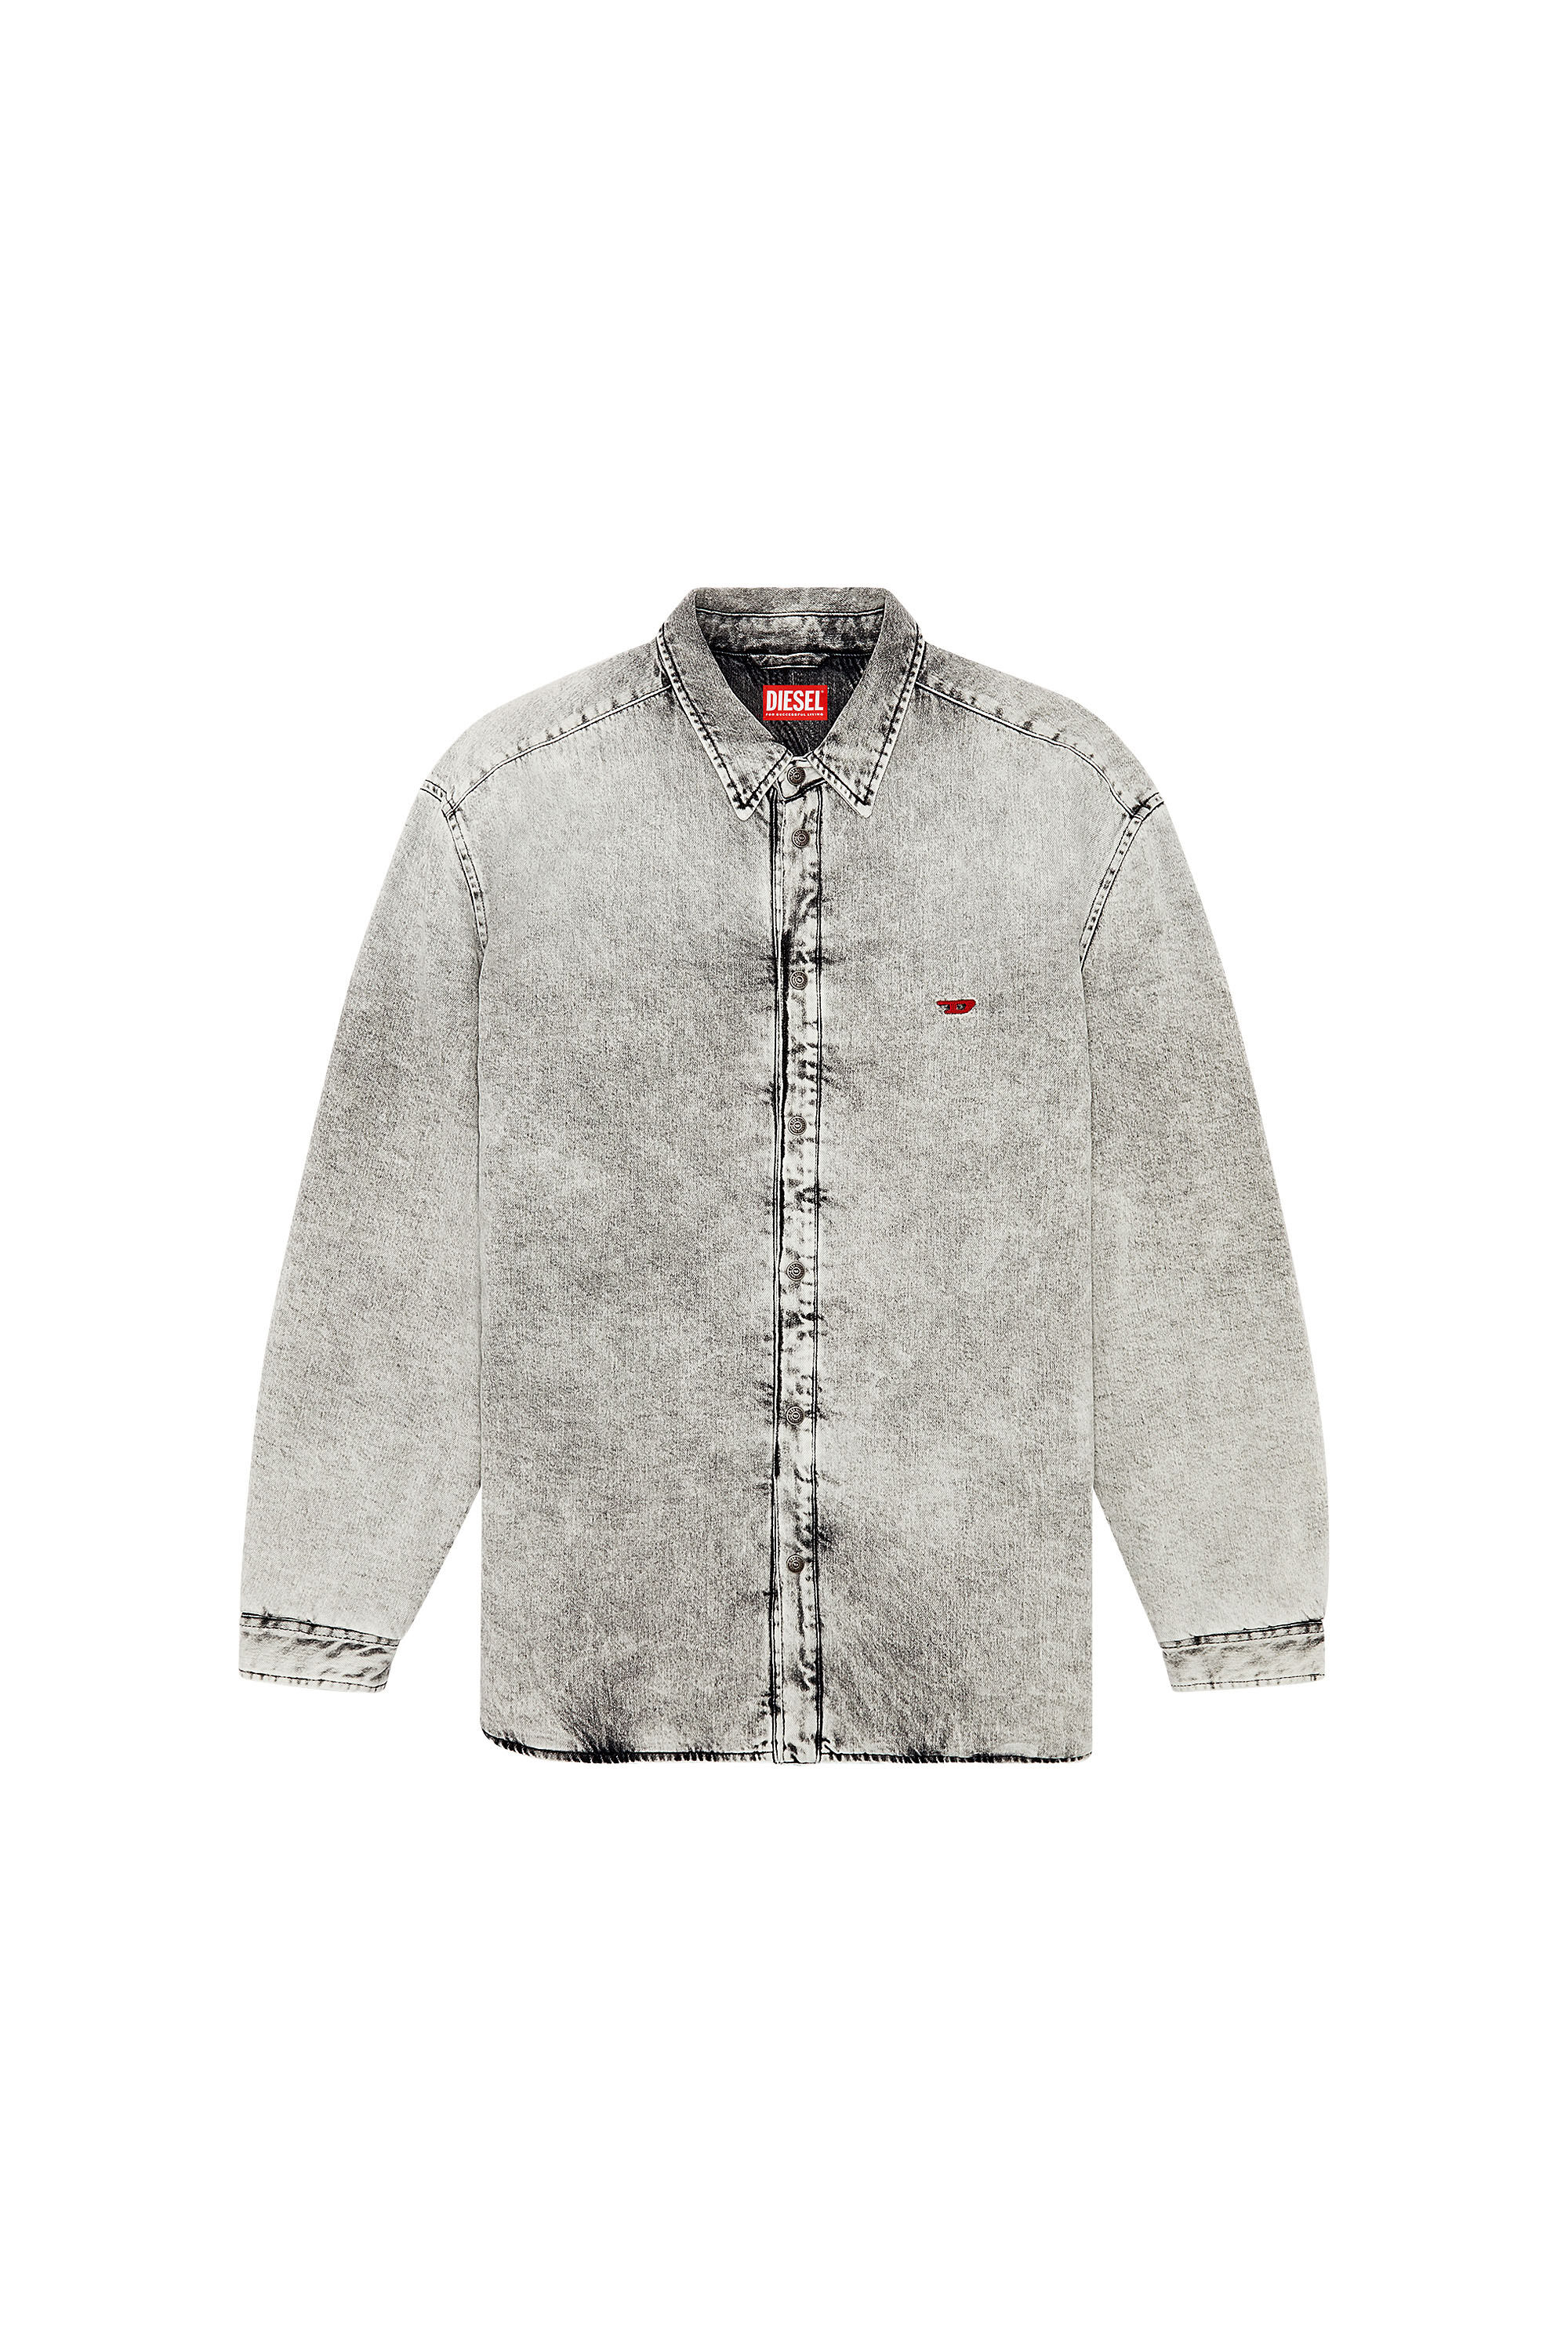 Diesel - D-FLAIM-S, Hombre Padded overshirt in tailored denim in Gris - Image 2